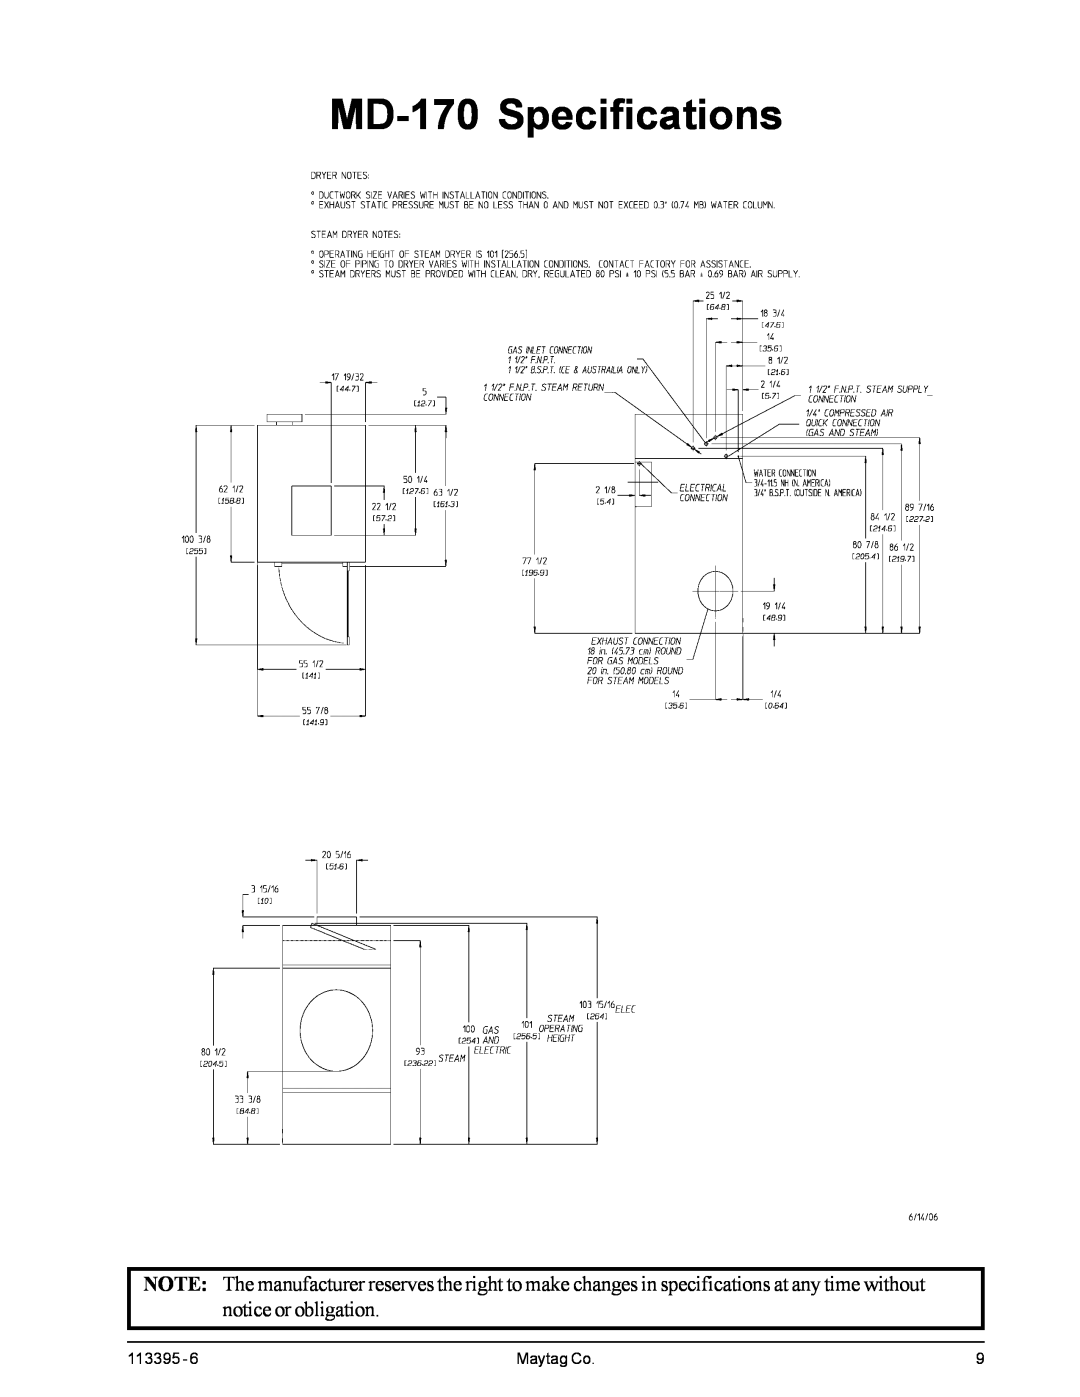 American Dryer Corp MDG-120PVV, MD-170PTVW installation manual MD-170 Specifications, Maytag Co, 113395 